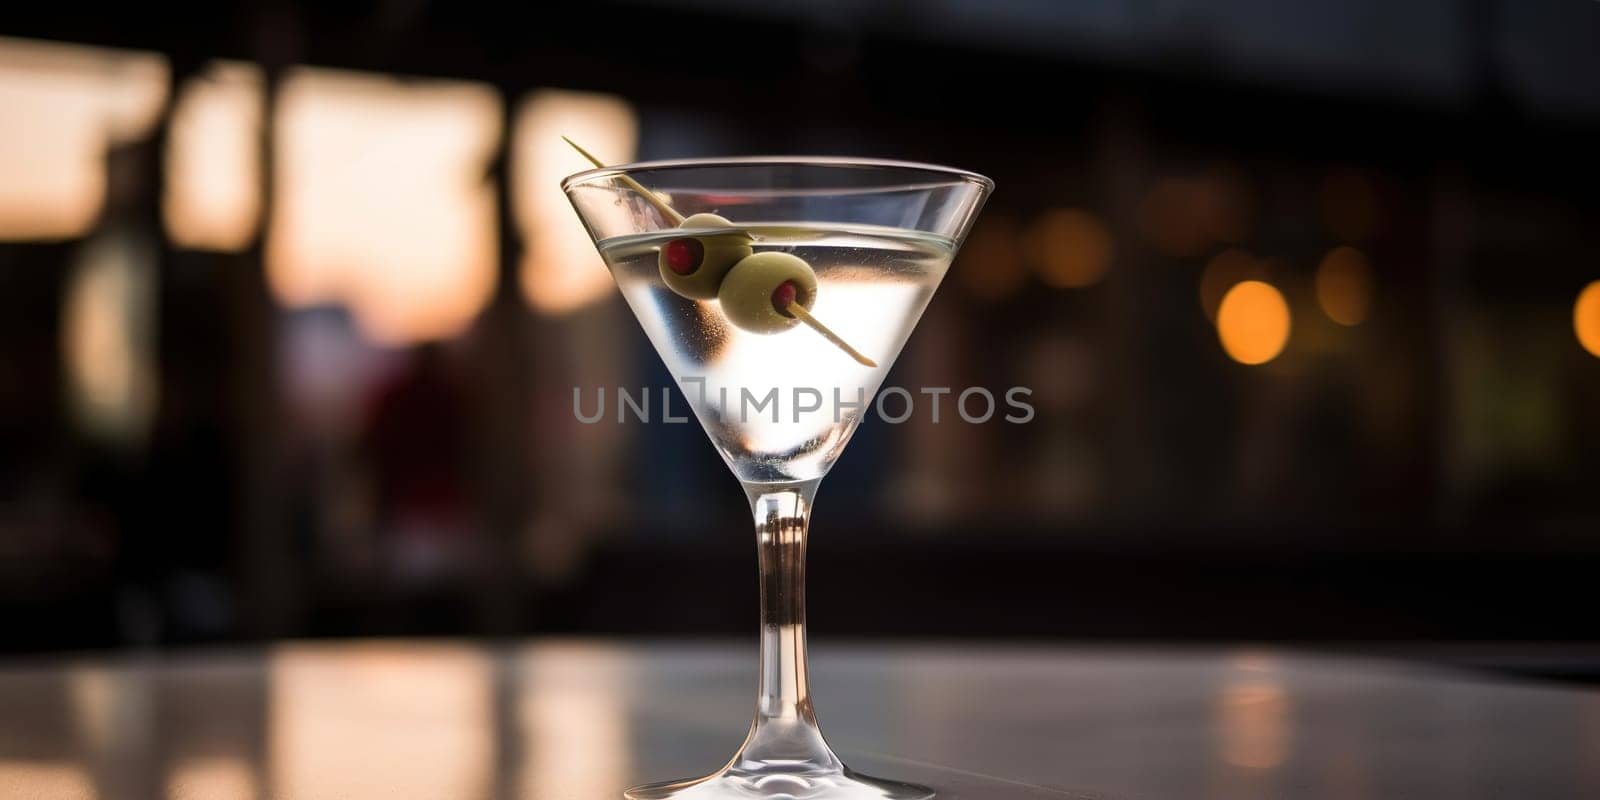 Cocktail martini with two olives in glass on a bar counter